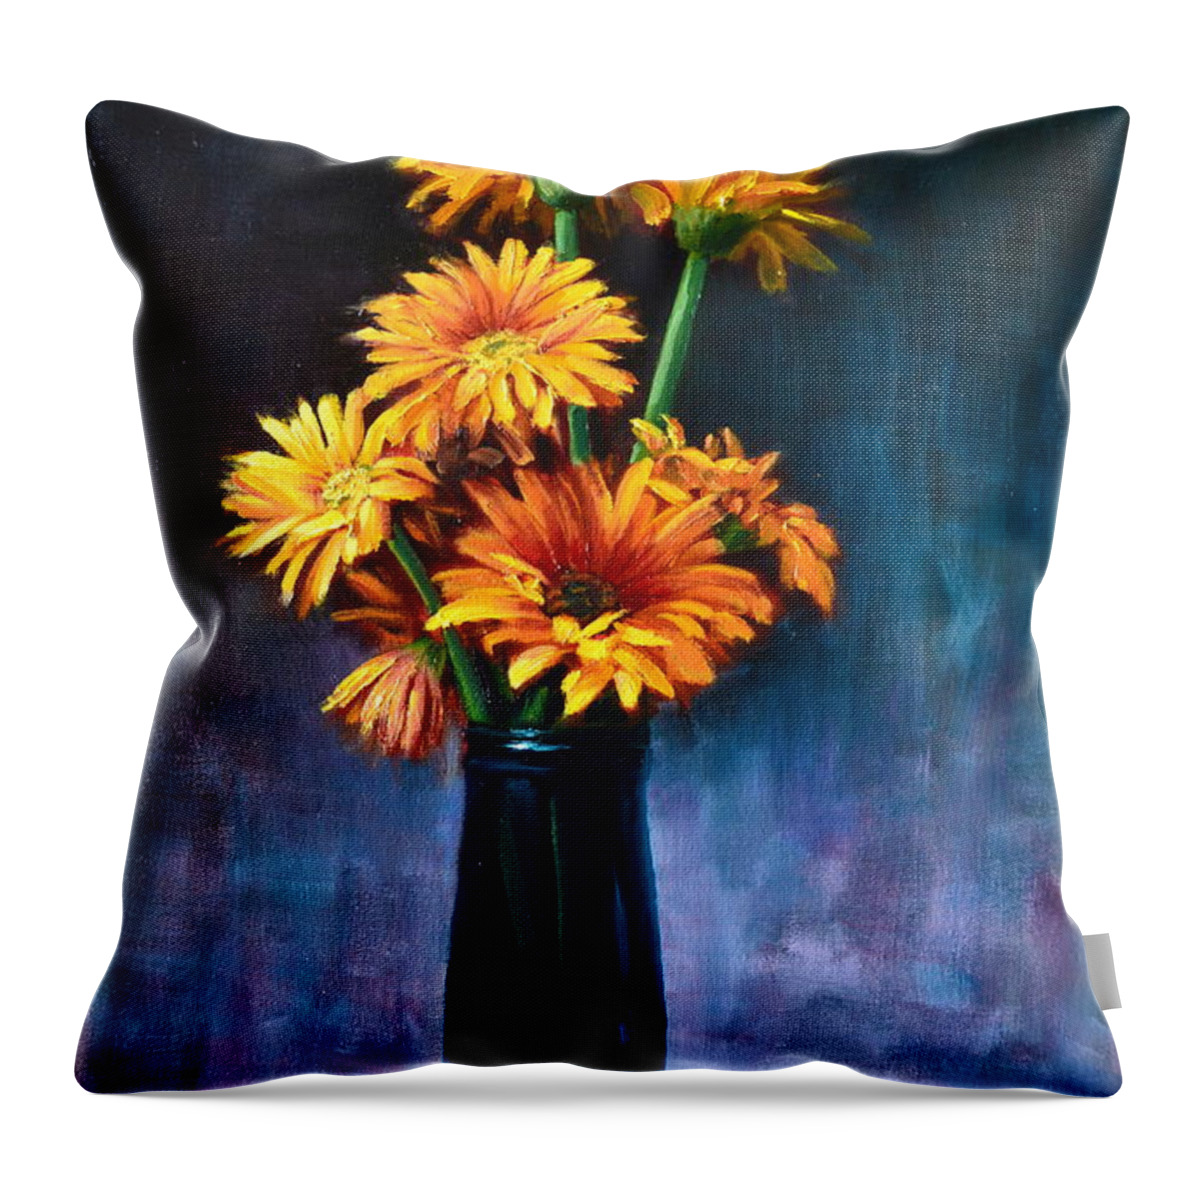 Daisies Throw Pillow featuring the painting Good Luck by Ningning Li